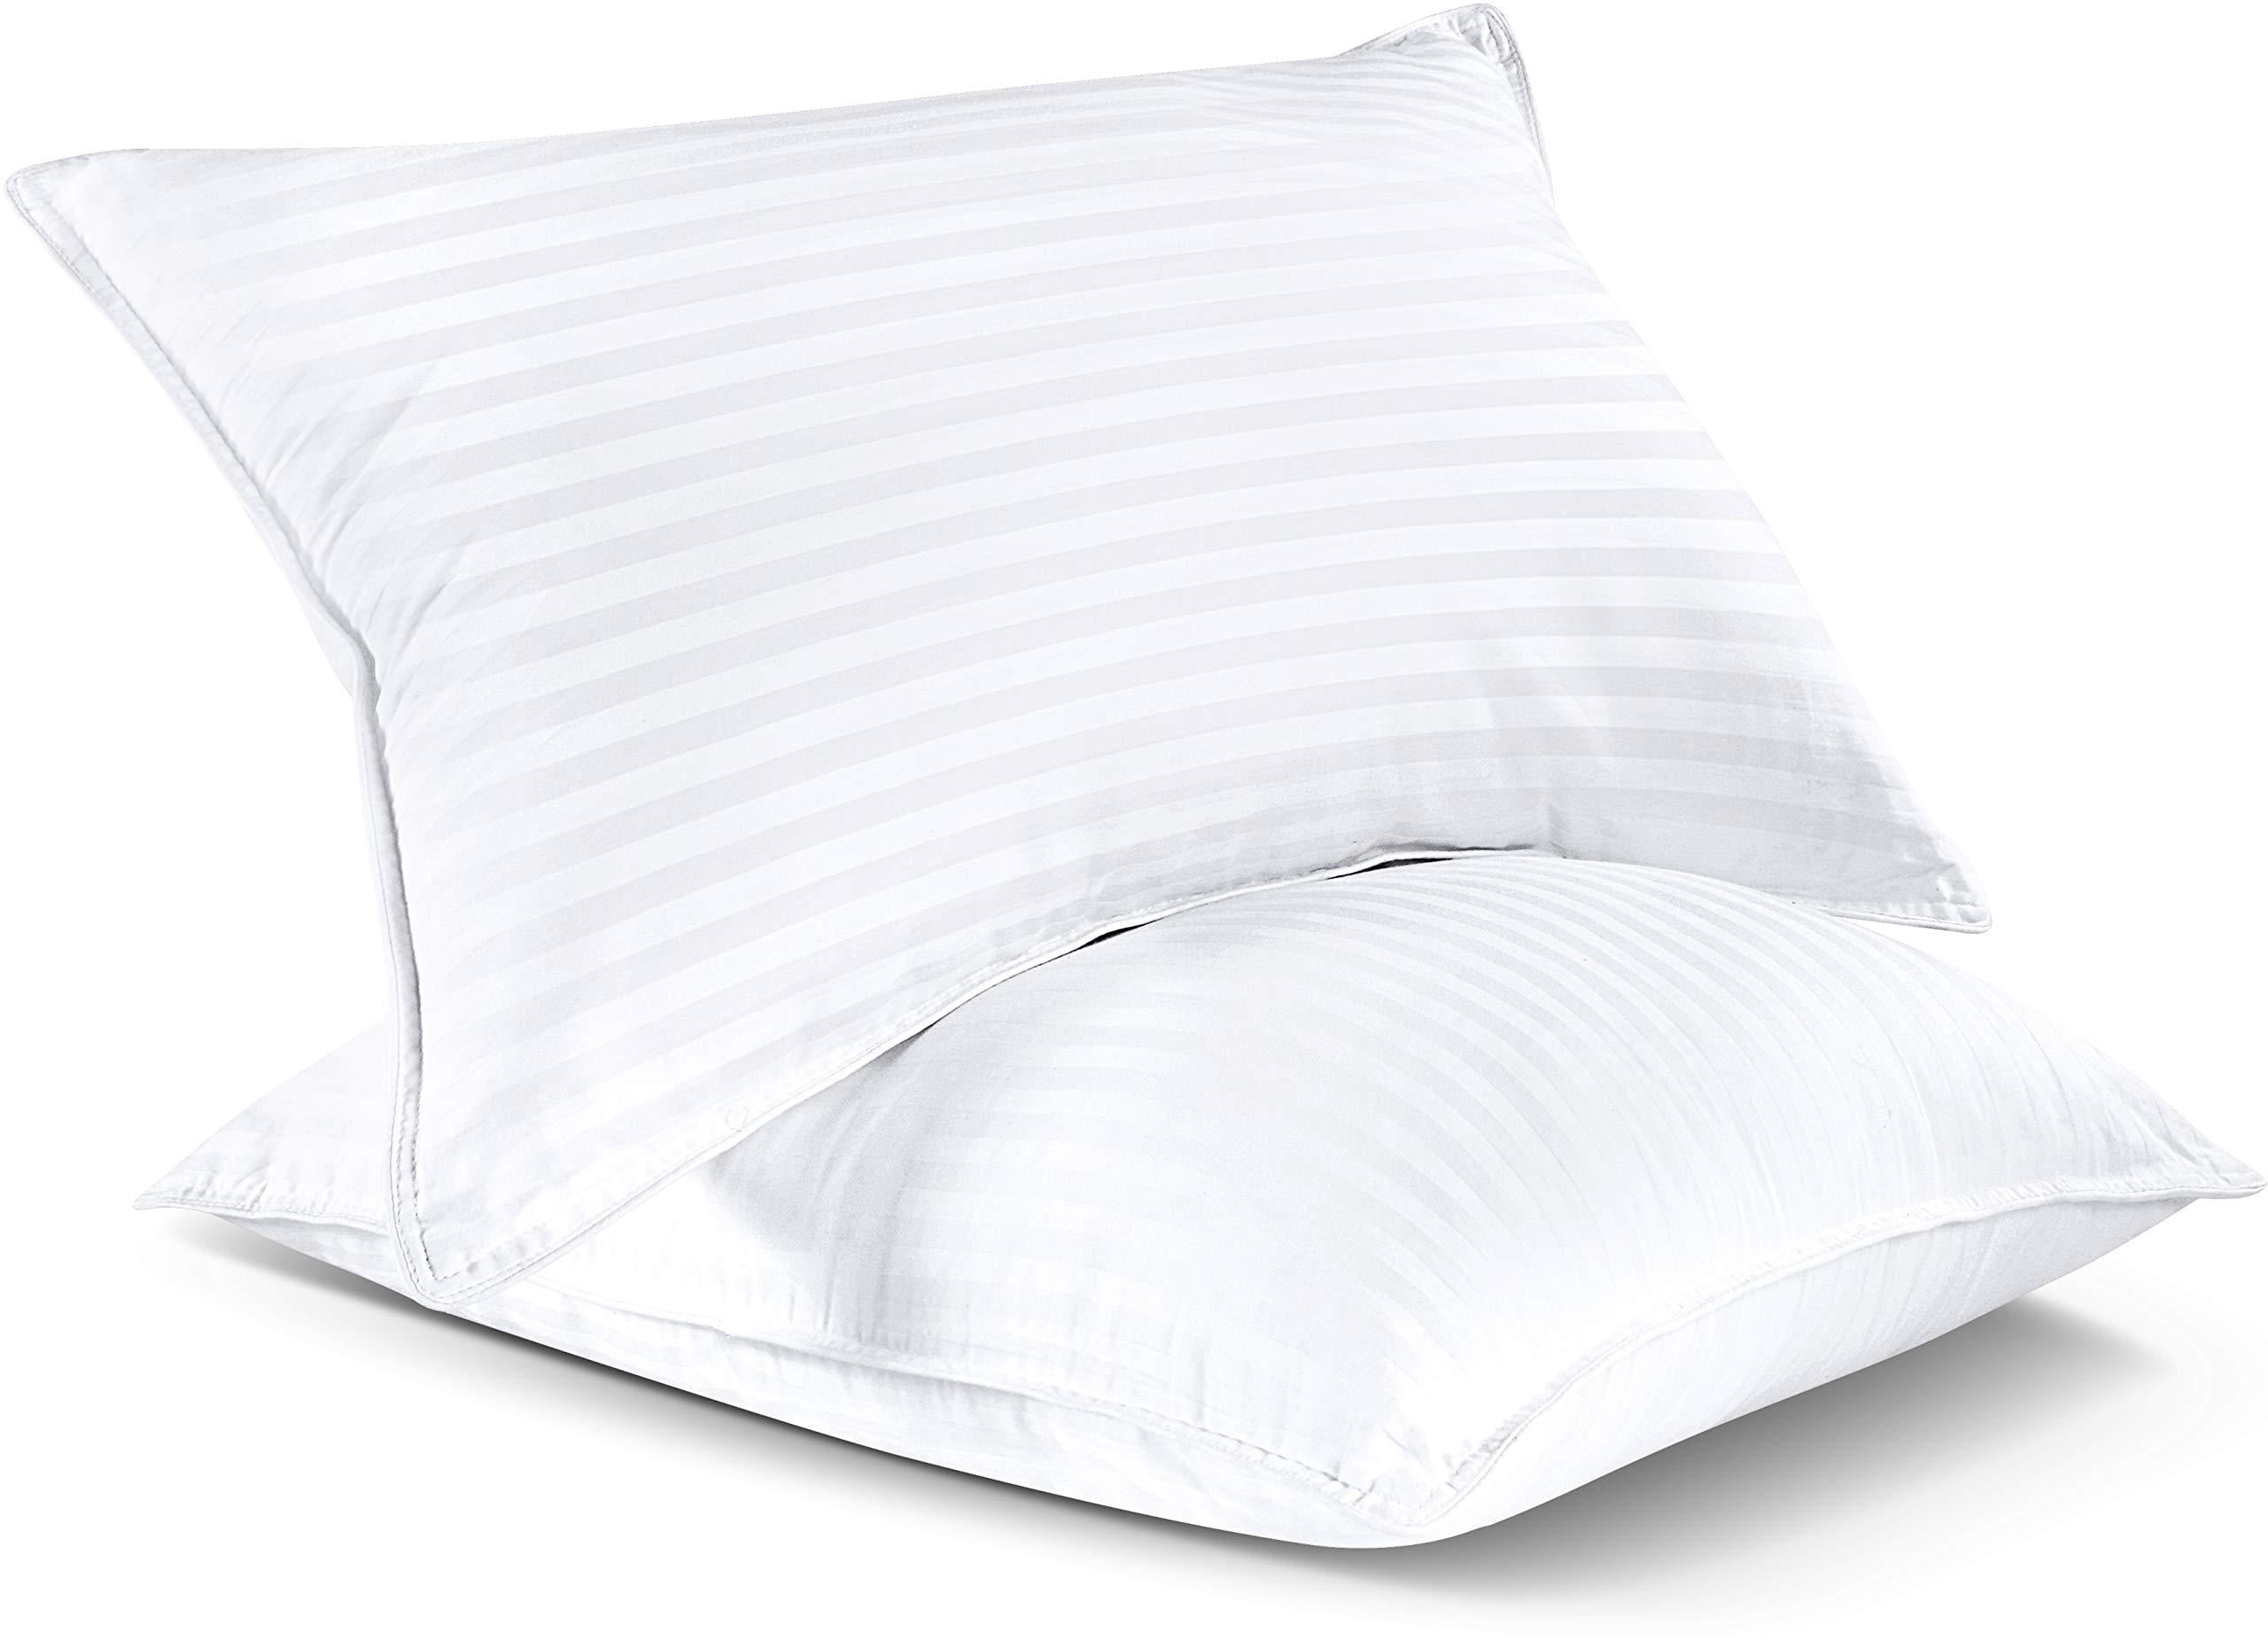 Utopia Bedding Bed Pillows for Sleeping Queen Size (White), Set of 2,  Cooling